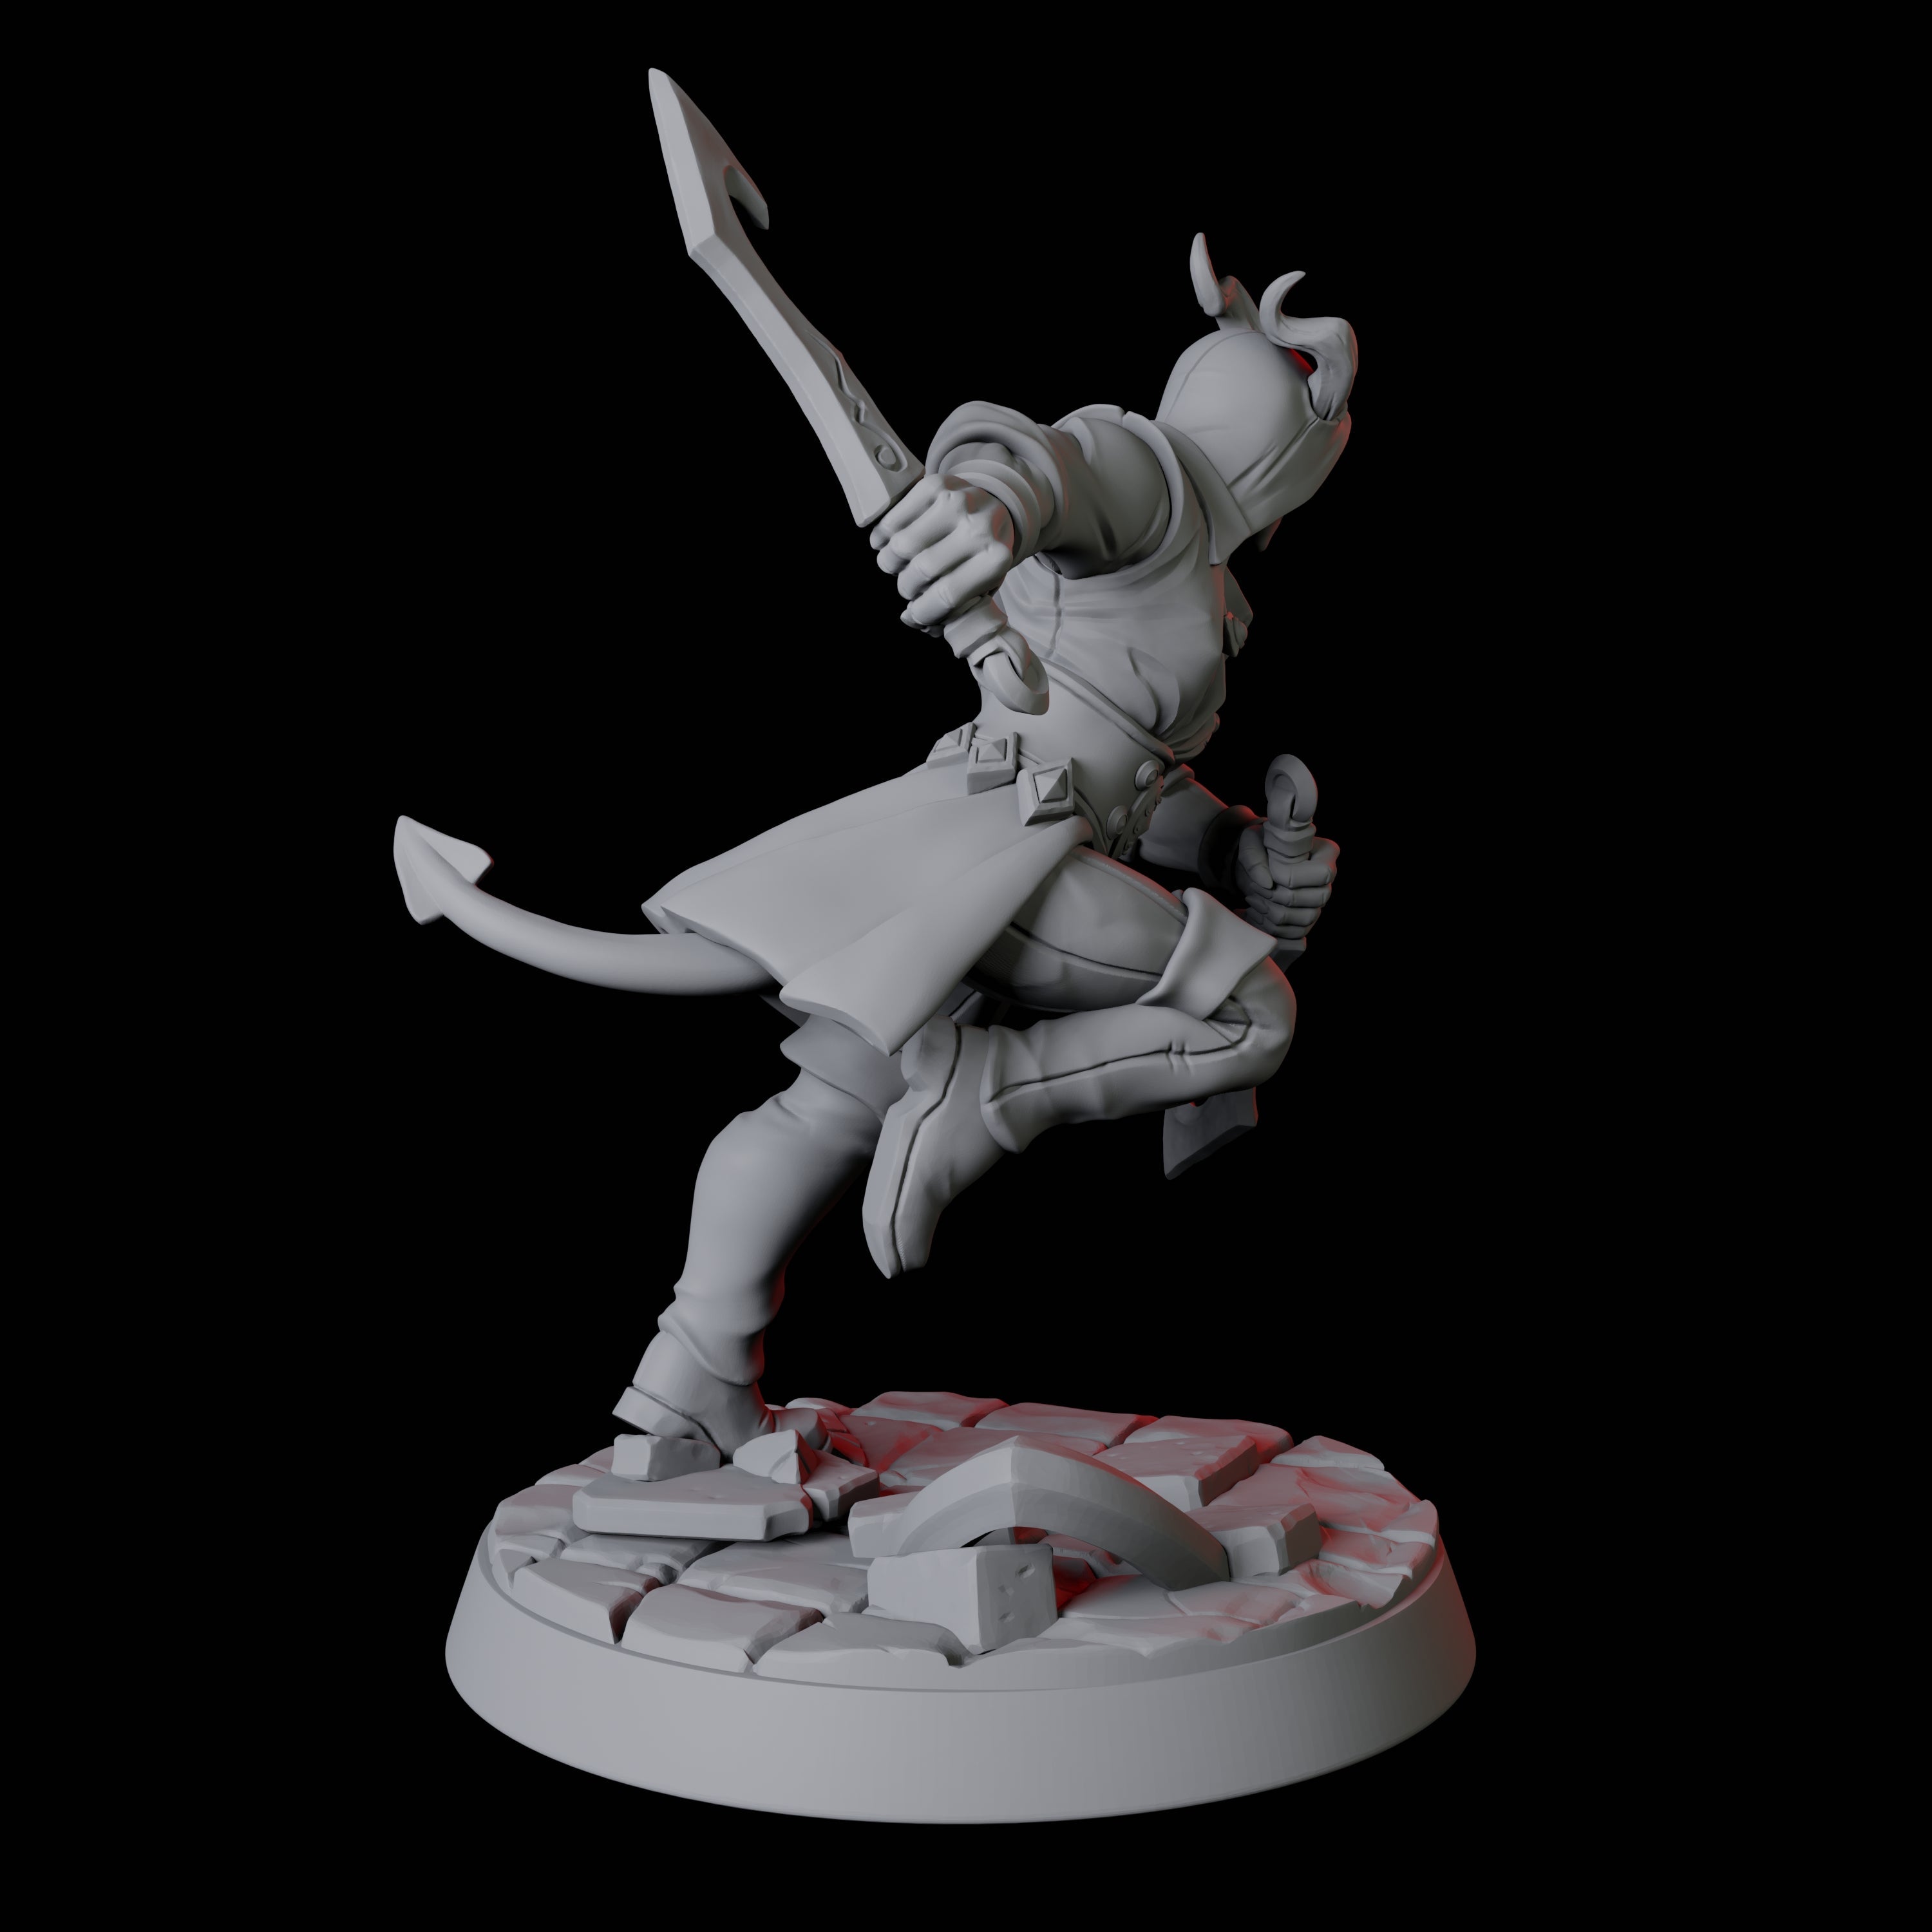 Six Tiefling Trickster Fighters Miniature for Dungeons and Dragons, Pathfinder or other TTRPGs